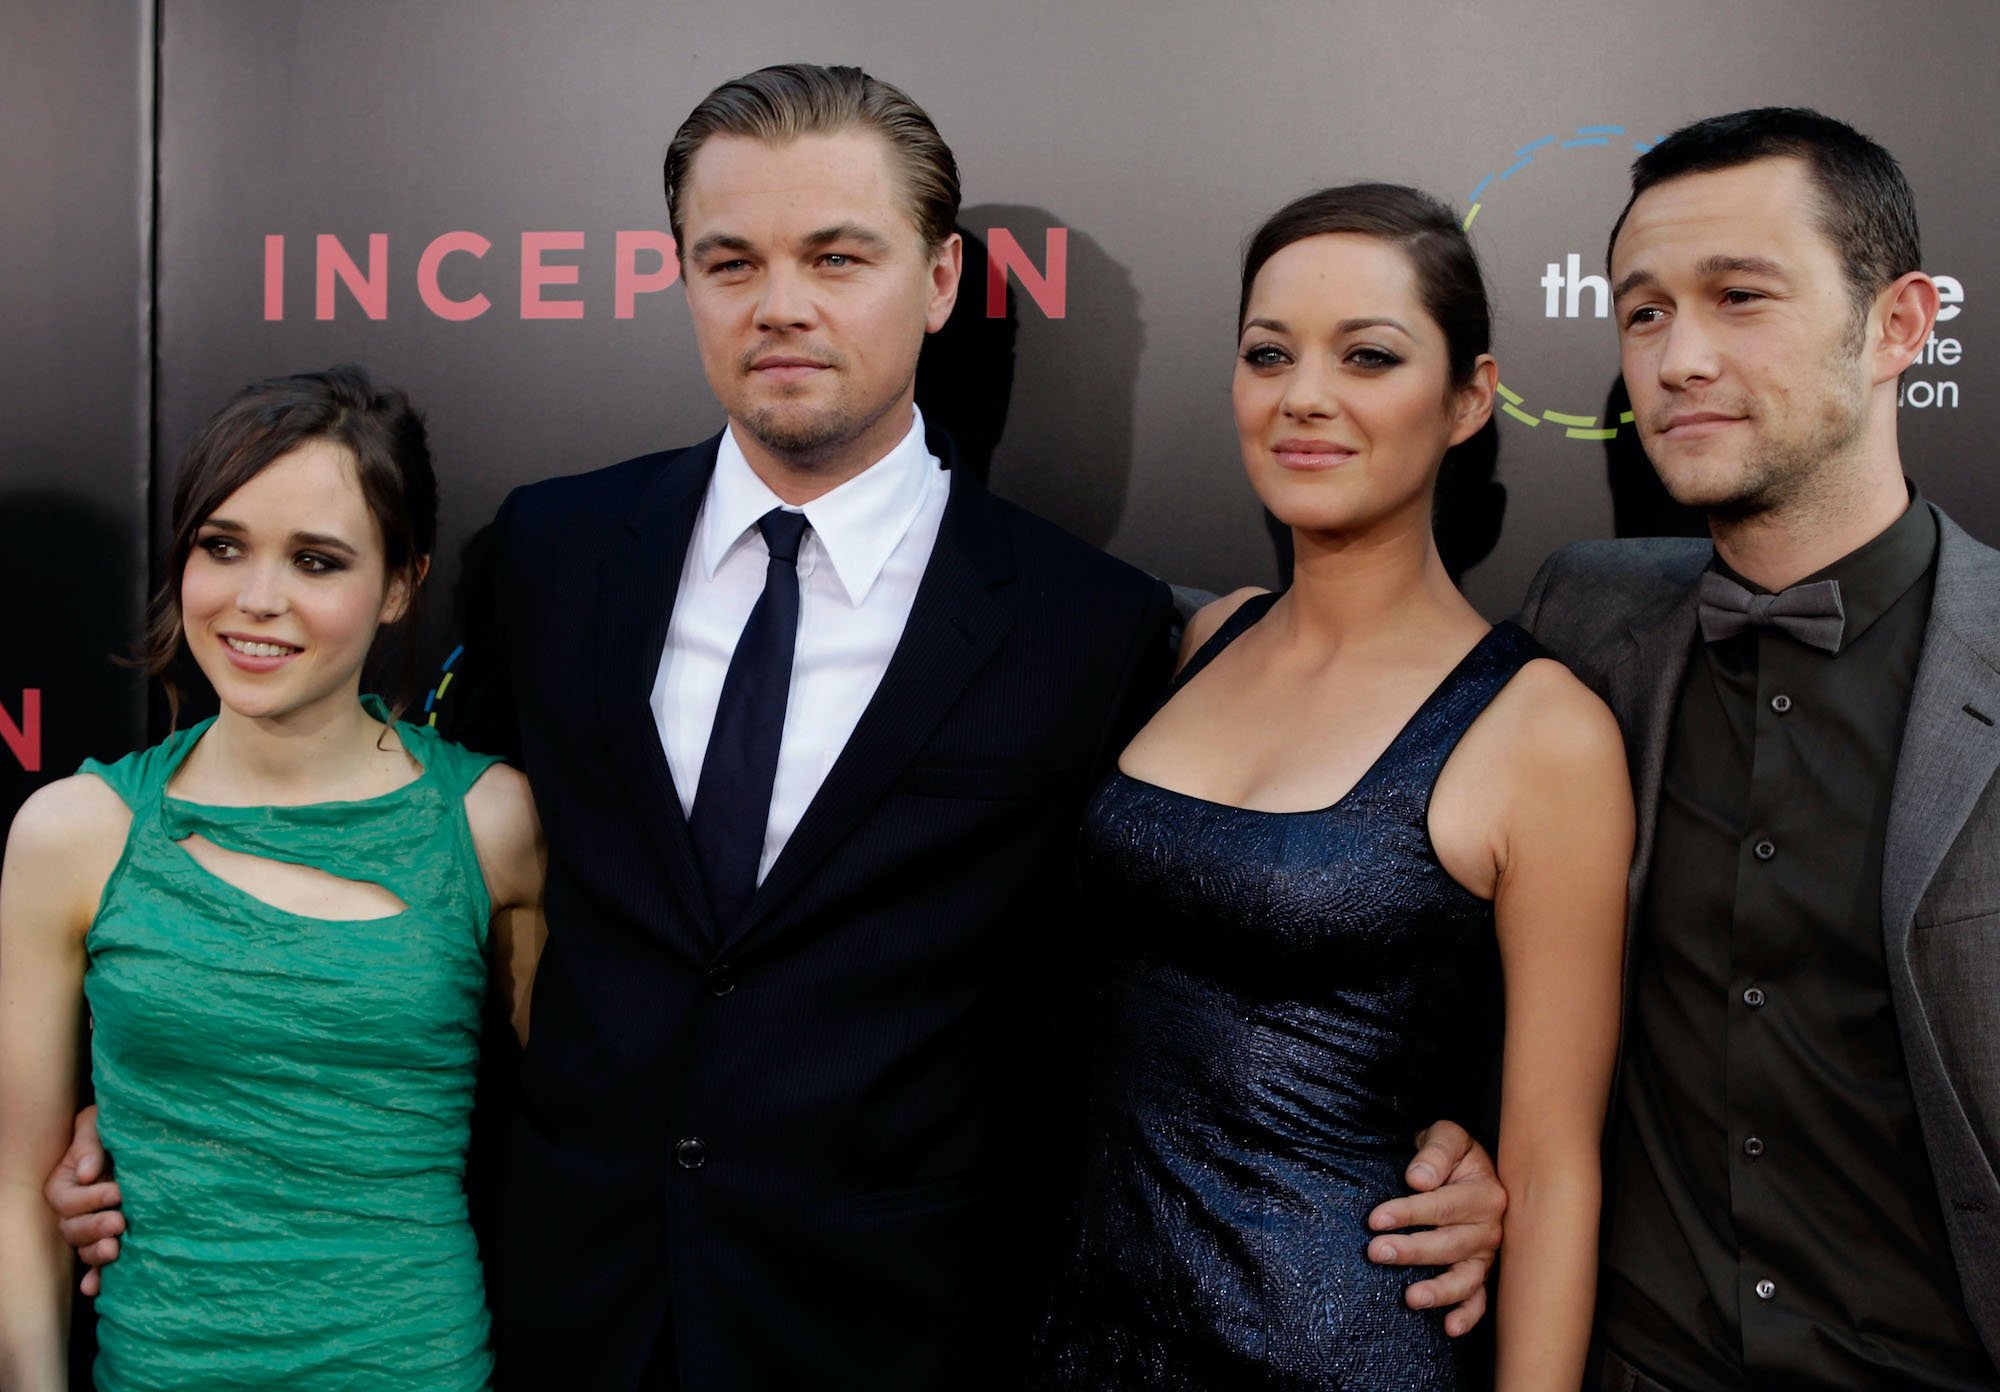 'Inception' cast smiling in front of a black background